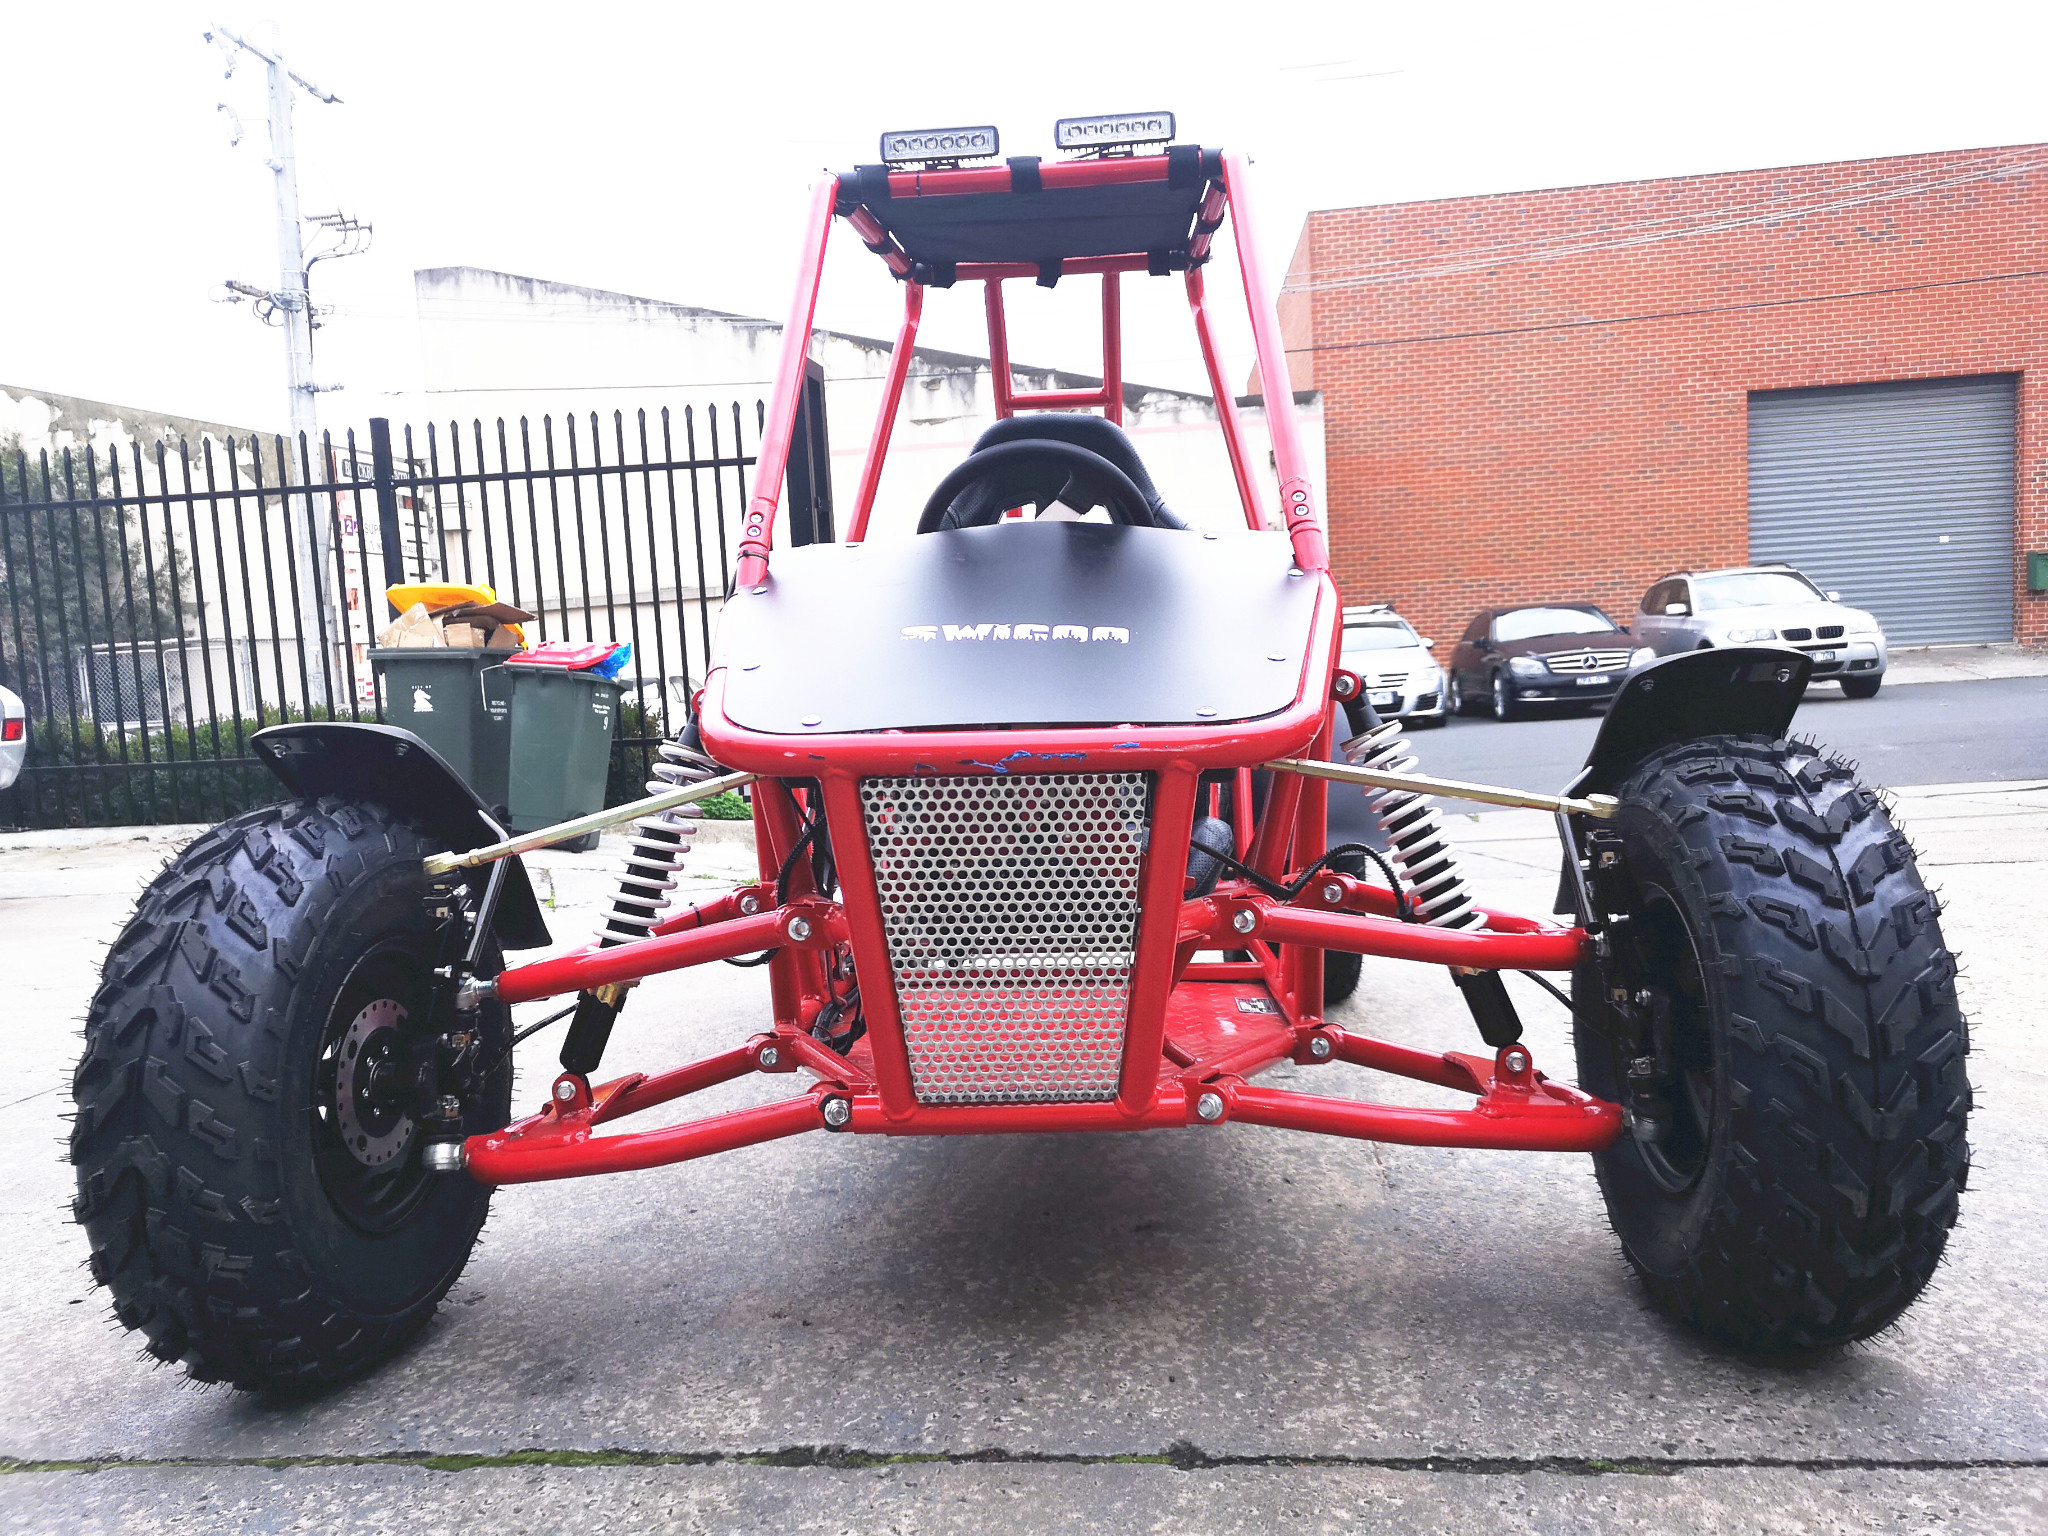 200cc off road single seat full size adult dune buggy 1 forward/1